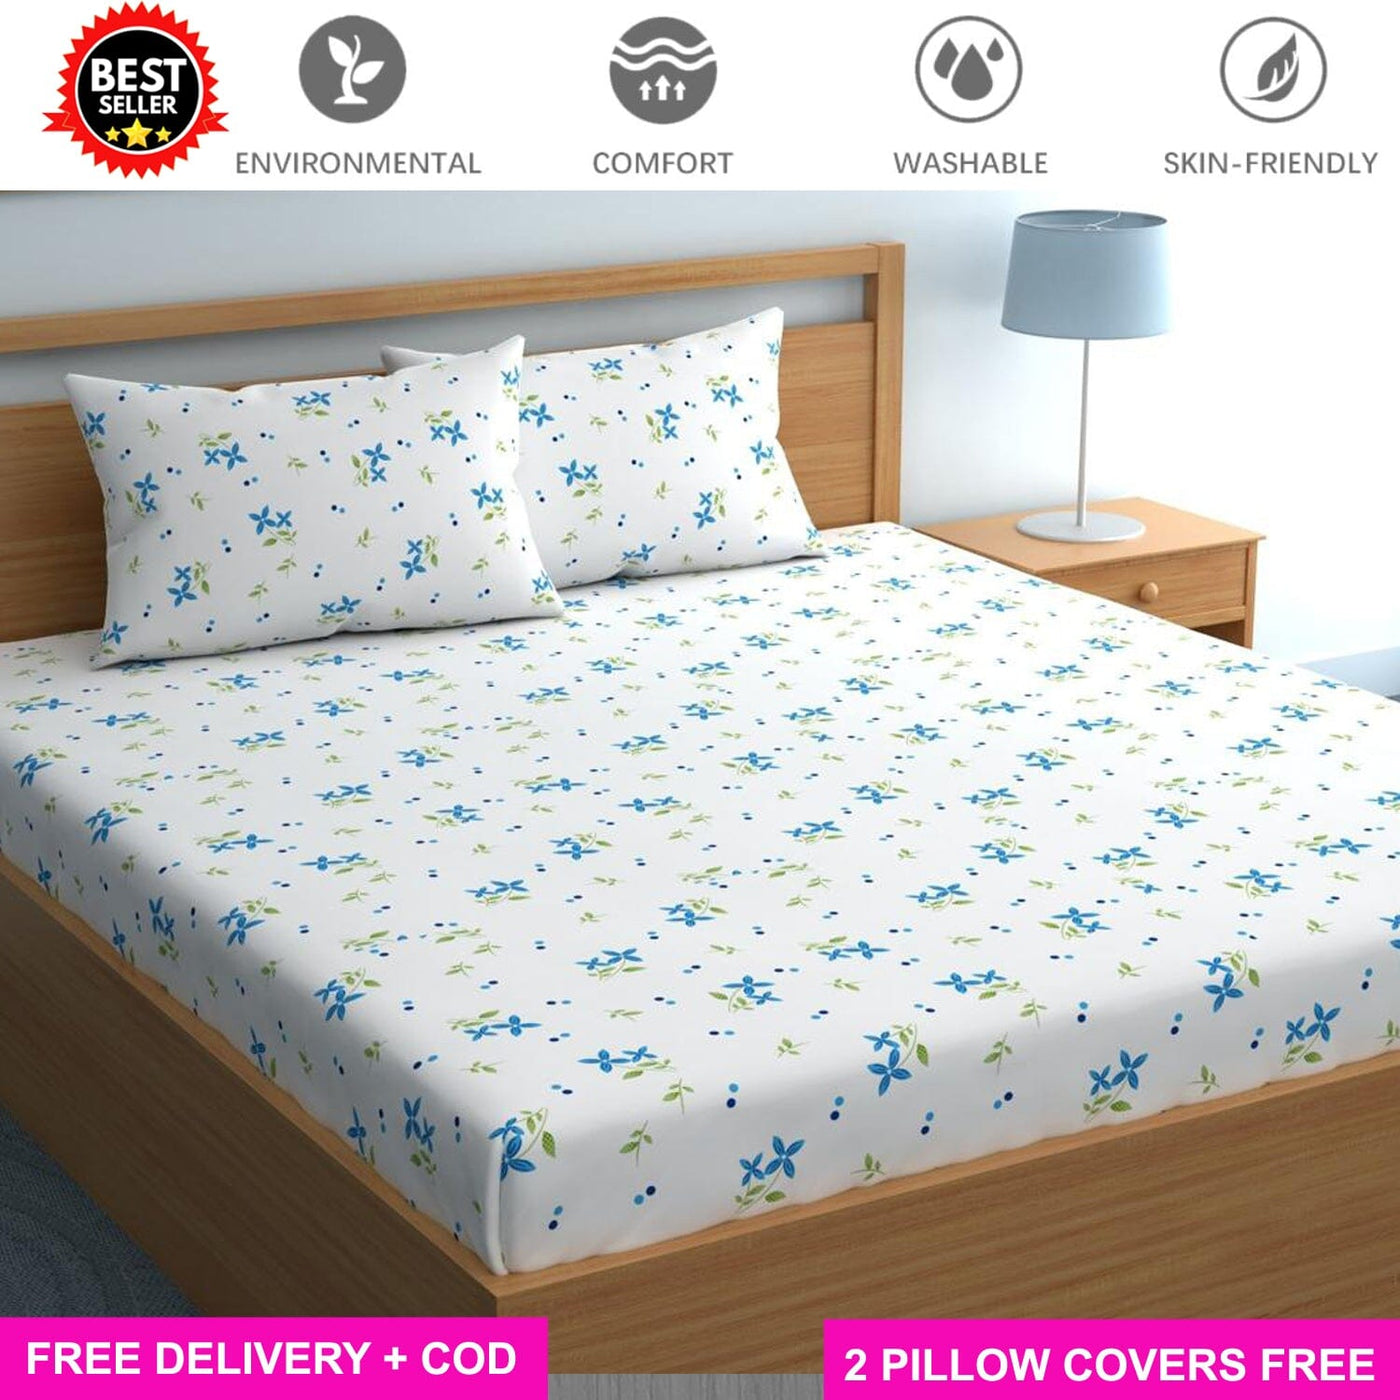 Cotton Elastic Fitted Bedsheet with 2 Pillow Covers - Fits with any Beds & Mattresses Great Happy IN Blue Jasmin KING SIZE 